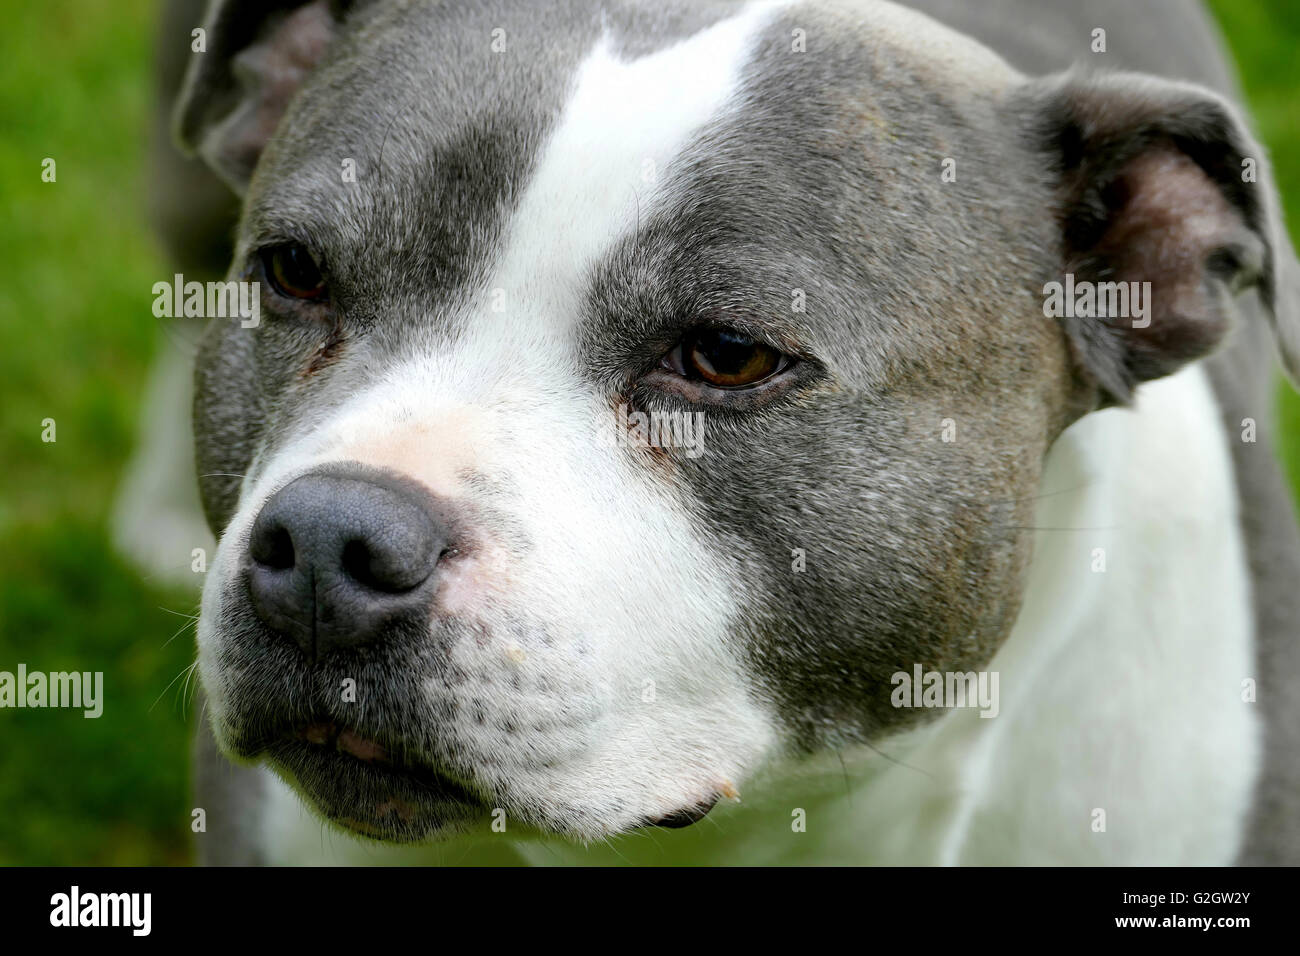 SUTTON-IN-ASHFIELD, NOTTINGHAMSHIRE, UK. MAY 22, 2016.  The head and face of a Stffordshire Blue terrier at Sutton-in-Ashfield i Stock Photo